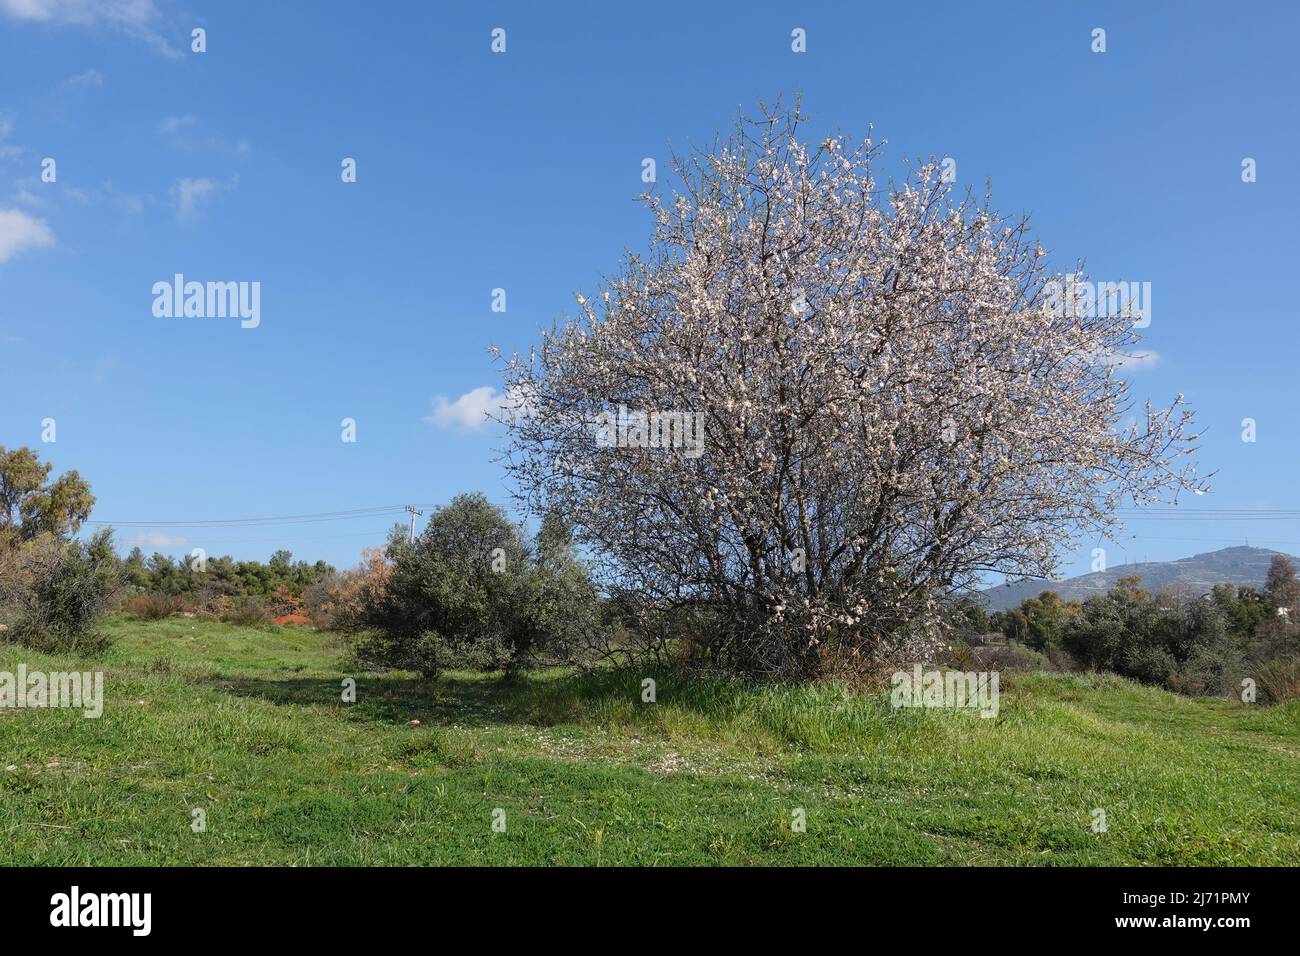 Almond tree with flowers under blue sky. Spring landscape. Stock Photo